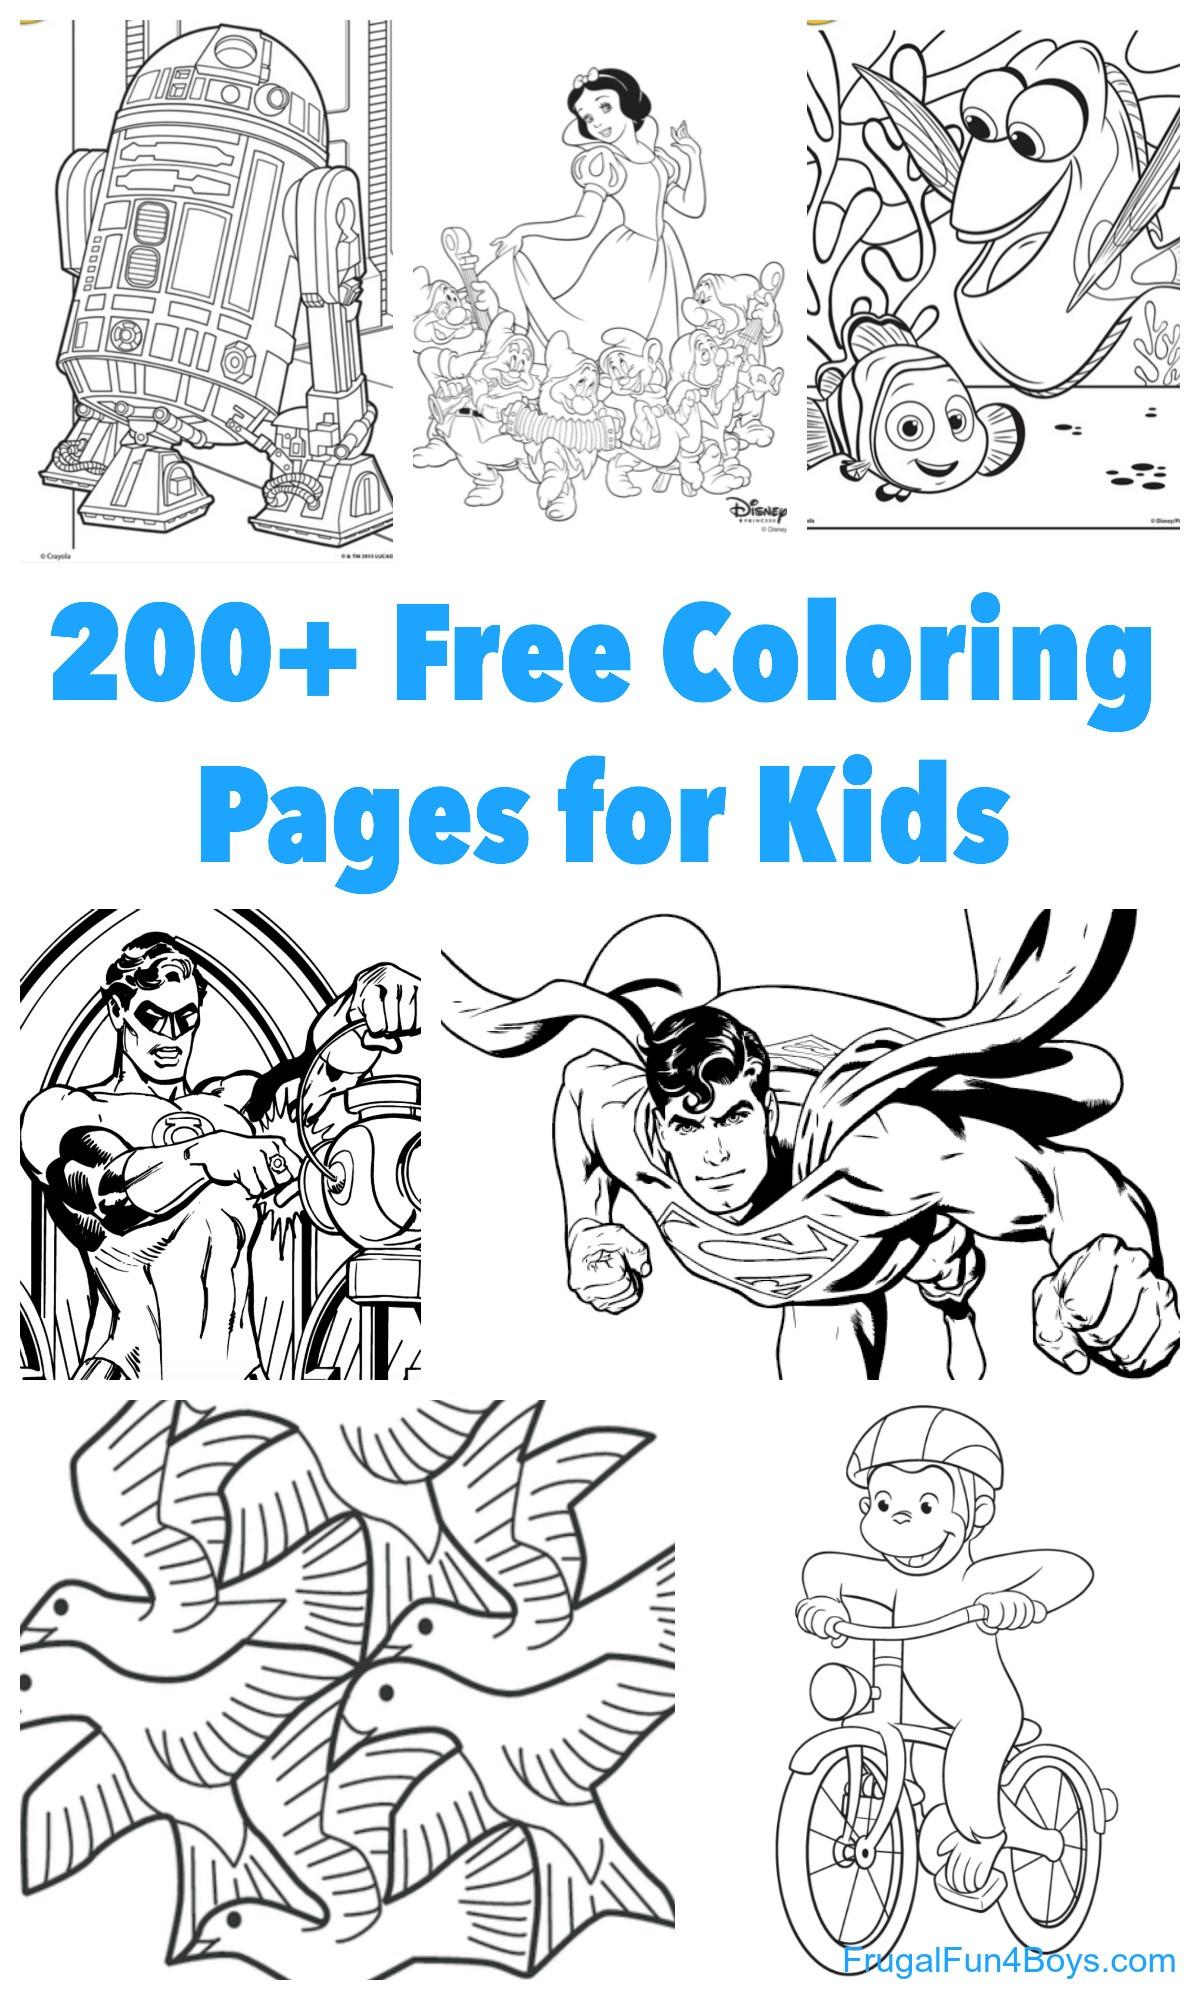 Free Coloring Pages Girls Printable
 200 Printable Coloring Pages for Kids Frugal Fun For